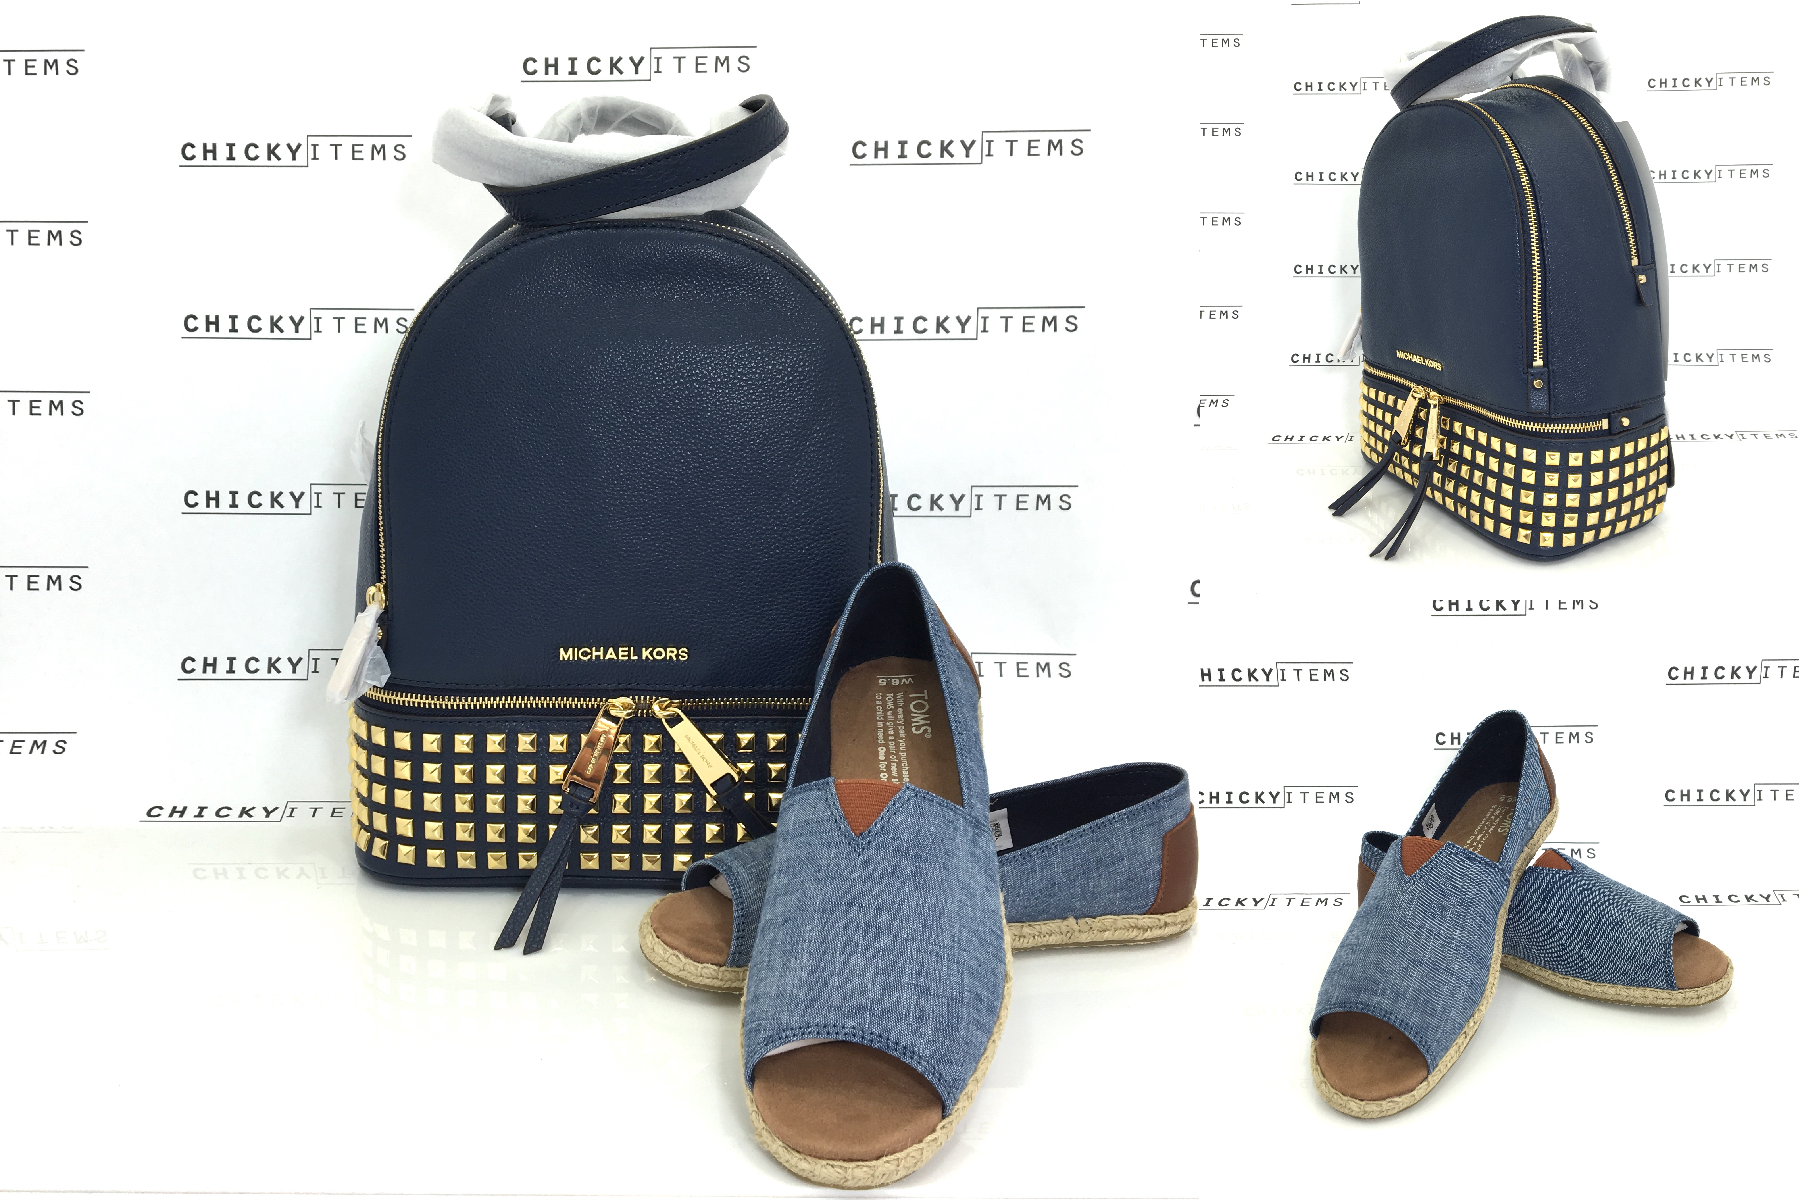 Michael Kors Rhea Small Studded Leather Backpack Toms CHAMBRAY WOMEN'S OPEN TOE ALPARGATAS